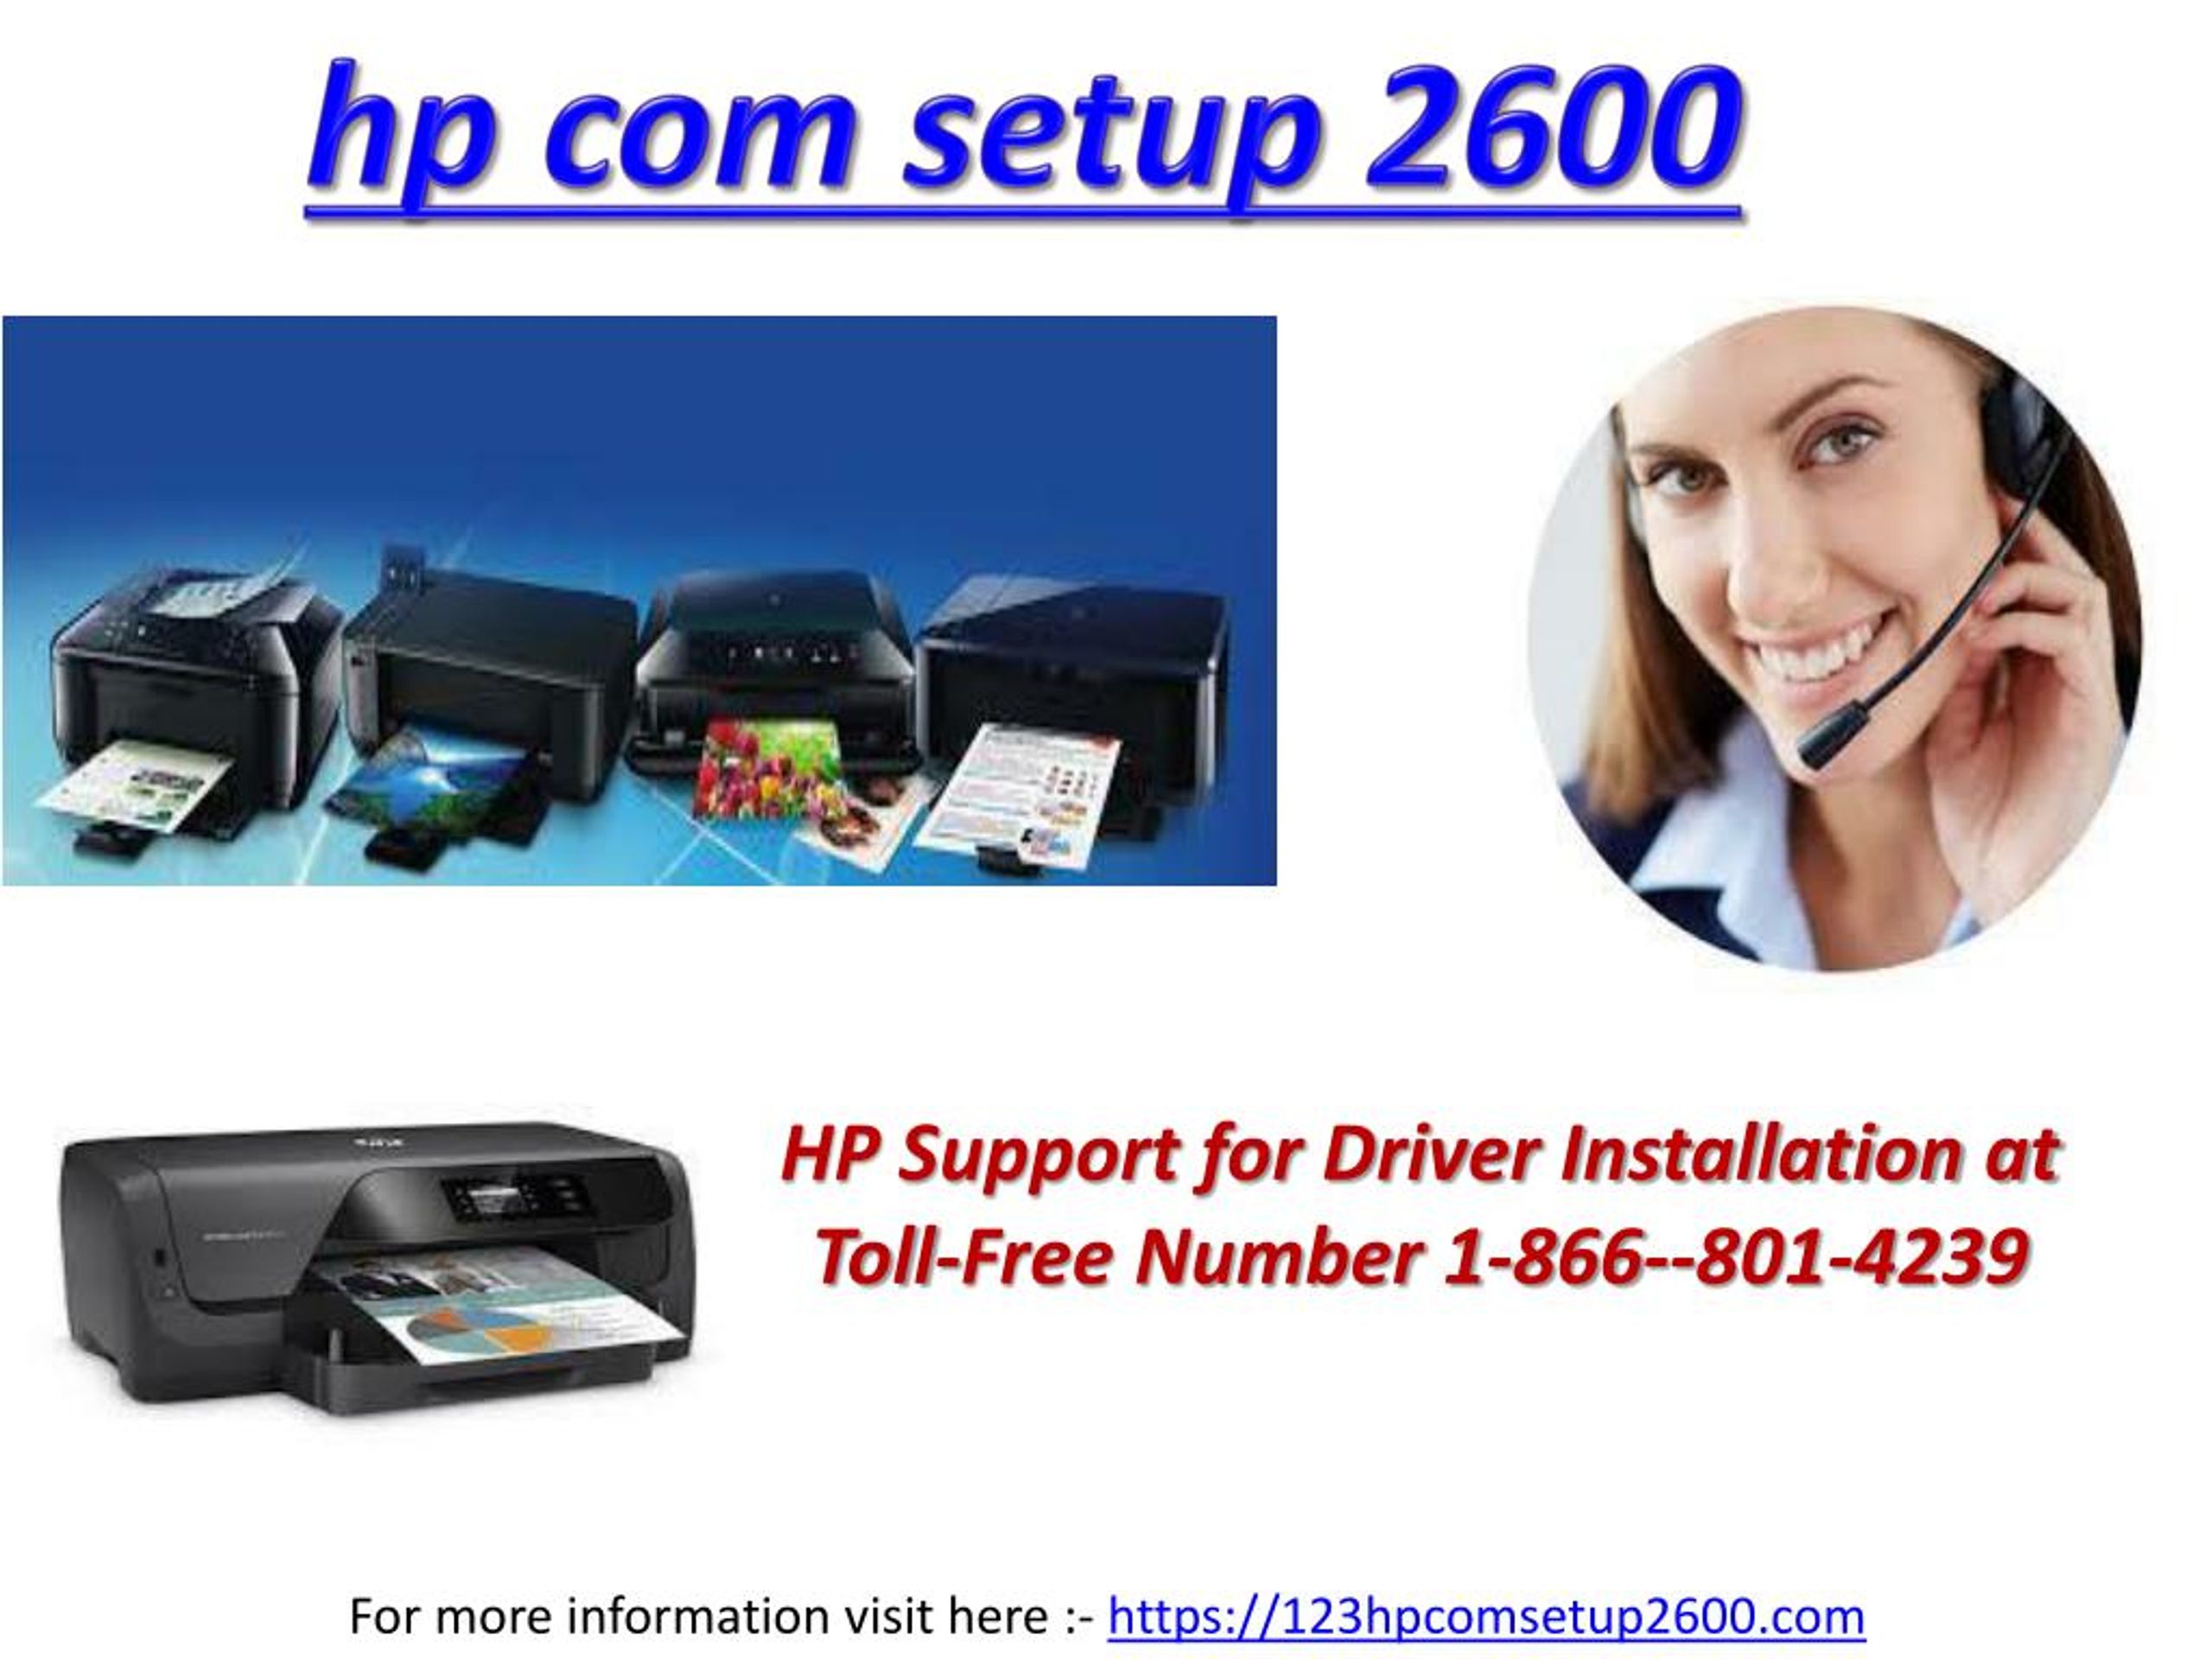 Ppt Hp Com Setup 2600 Powerpoint Presentation Free Download Id7946994 1079